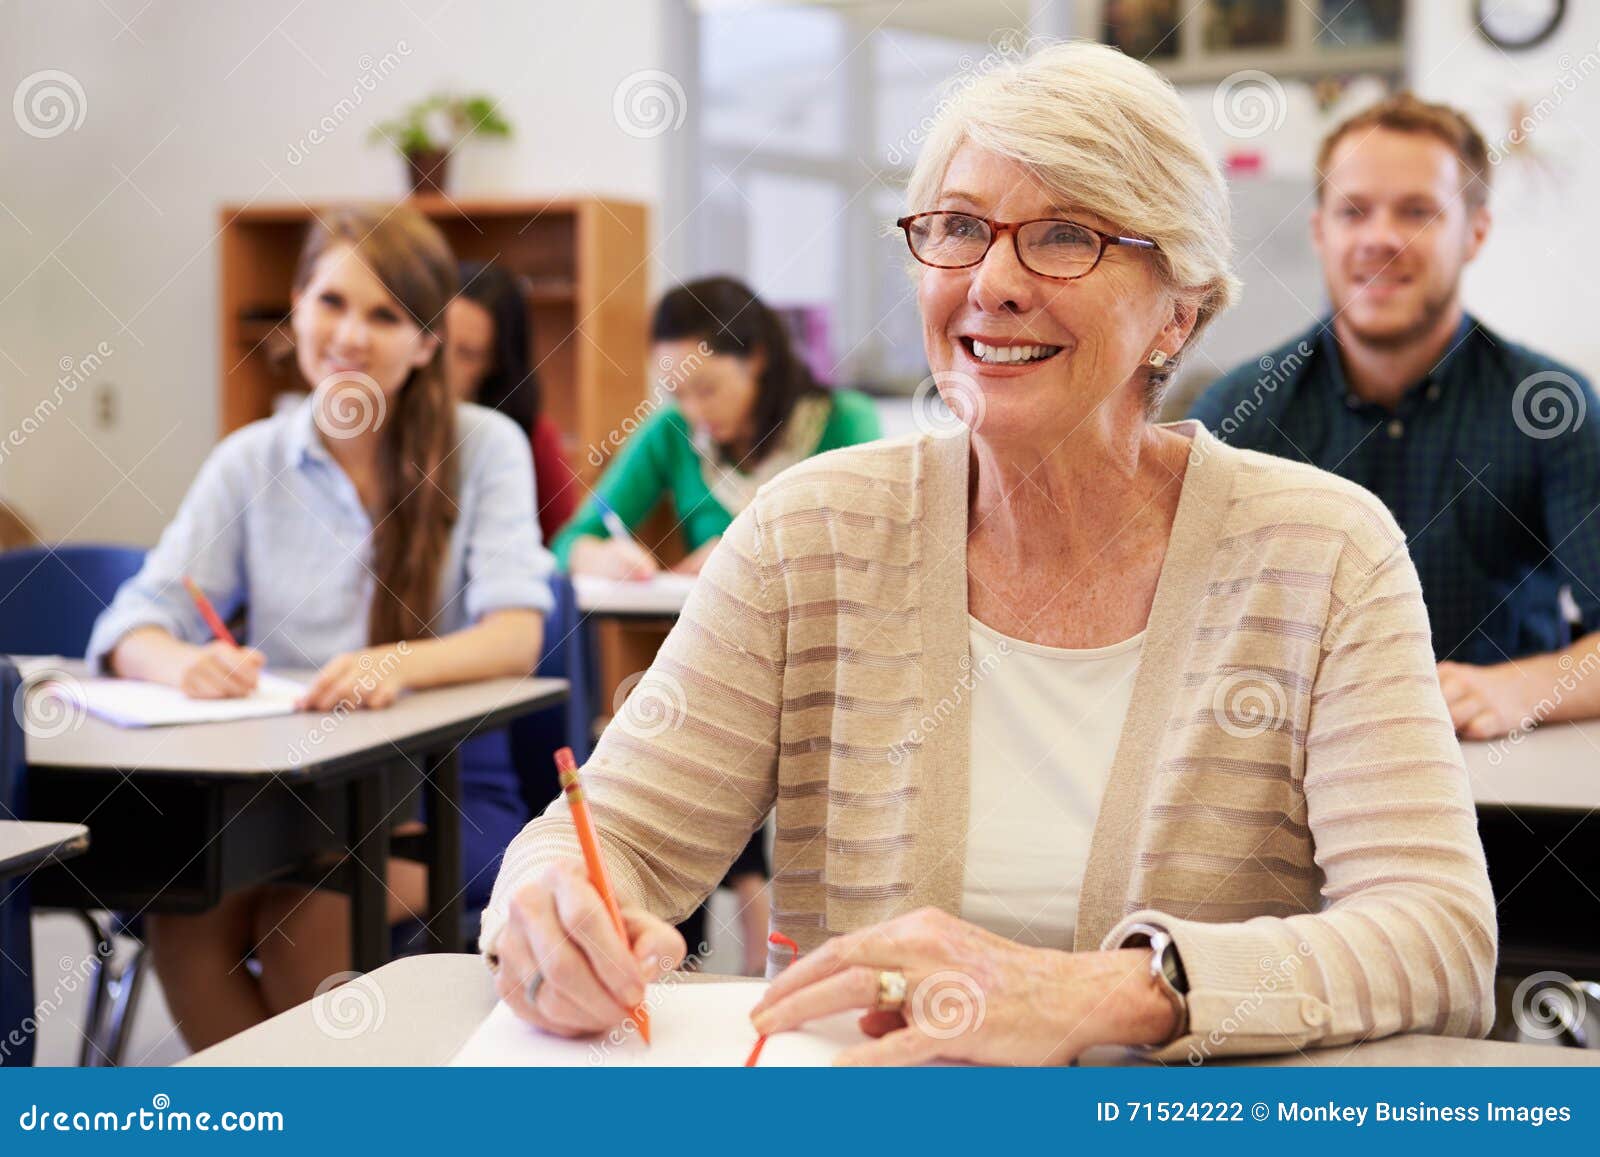 happy senior woman at an adult education class looking up